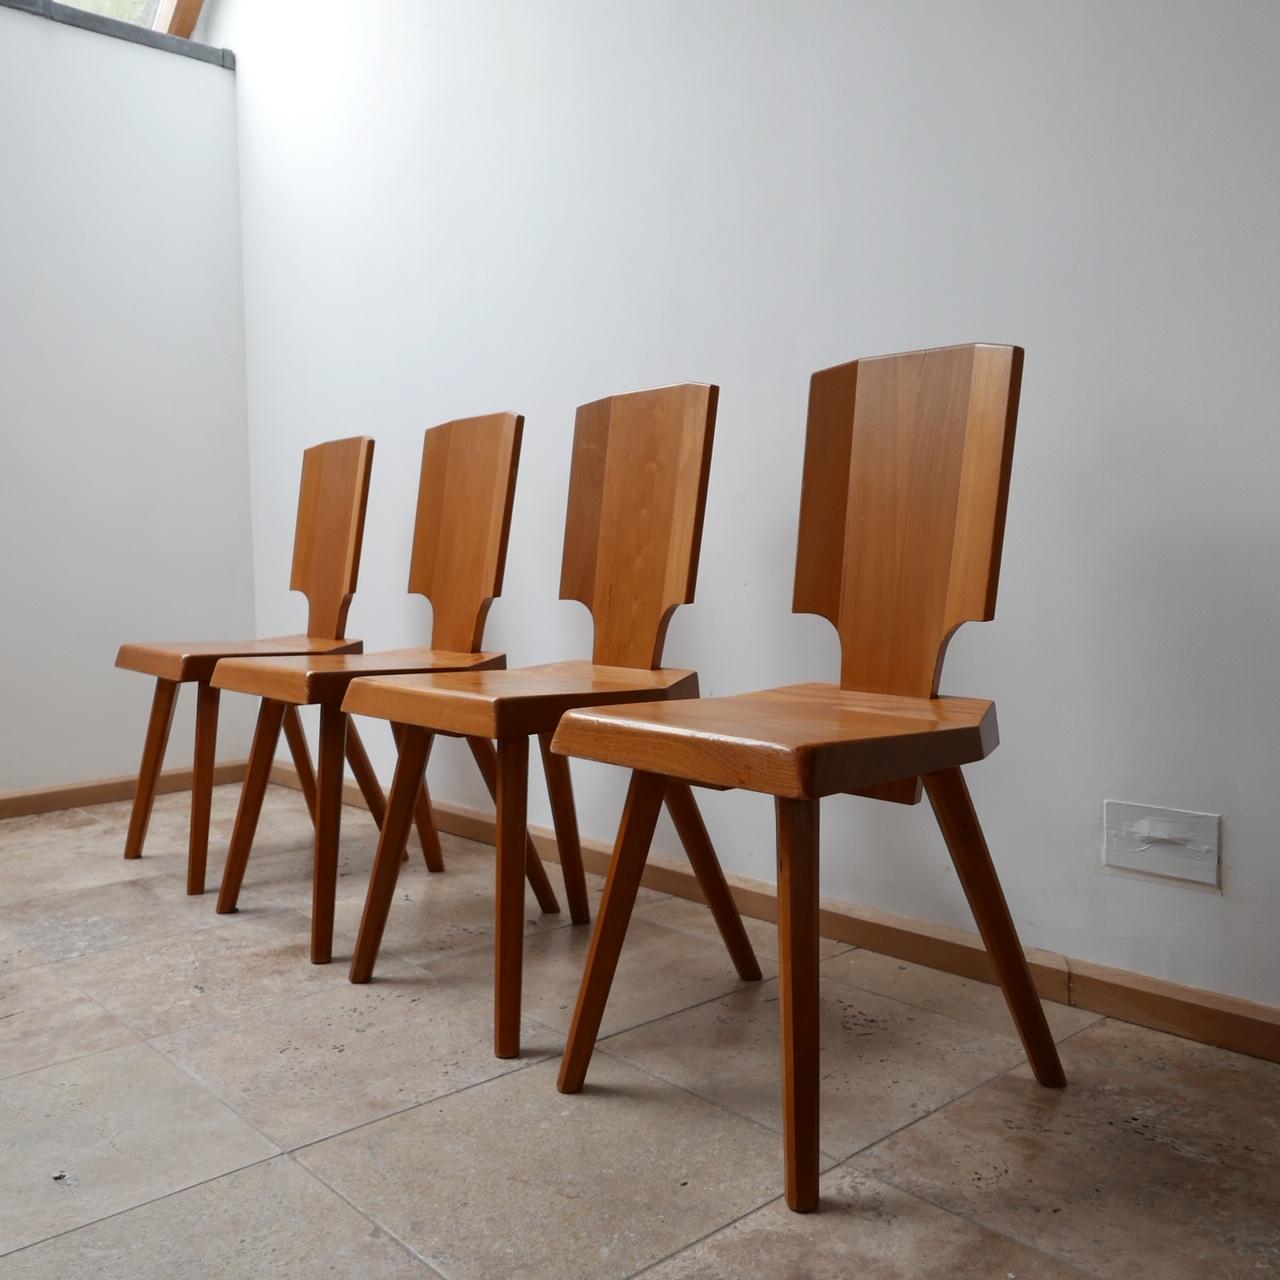 Pierre Chapo dining chairs.

French Elm.

S28 Model.

France, circa 1970s.

Another pair is due in from France so a set of six can be made.

Price is for the set of 4.

Vintage condition, some scuffs and marks commensurate with